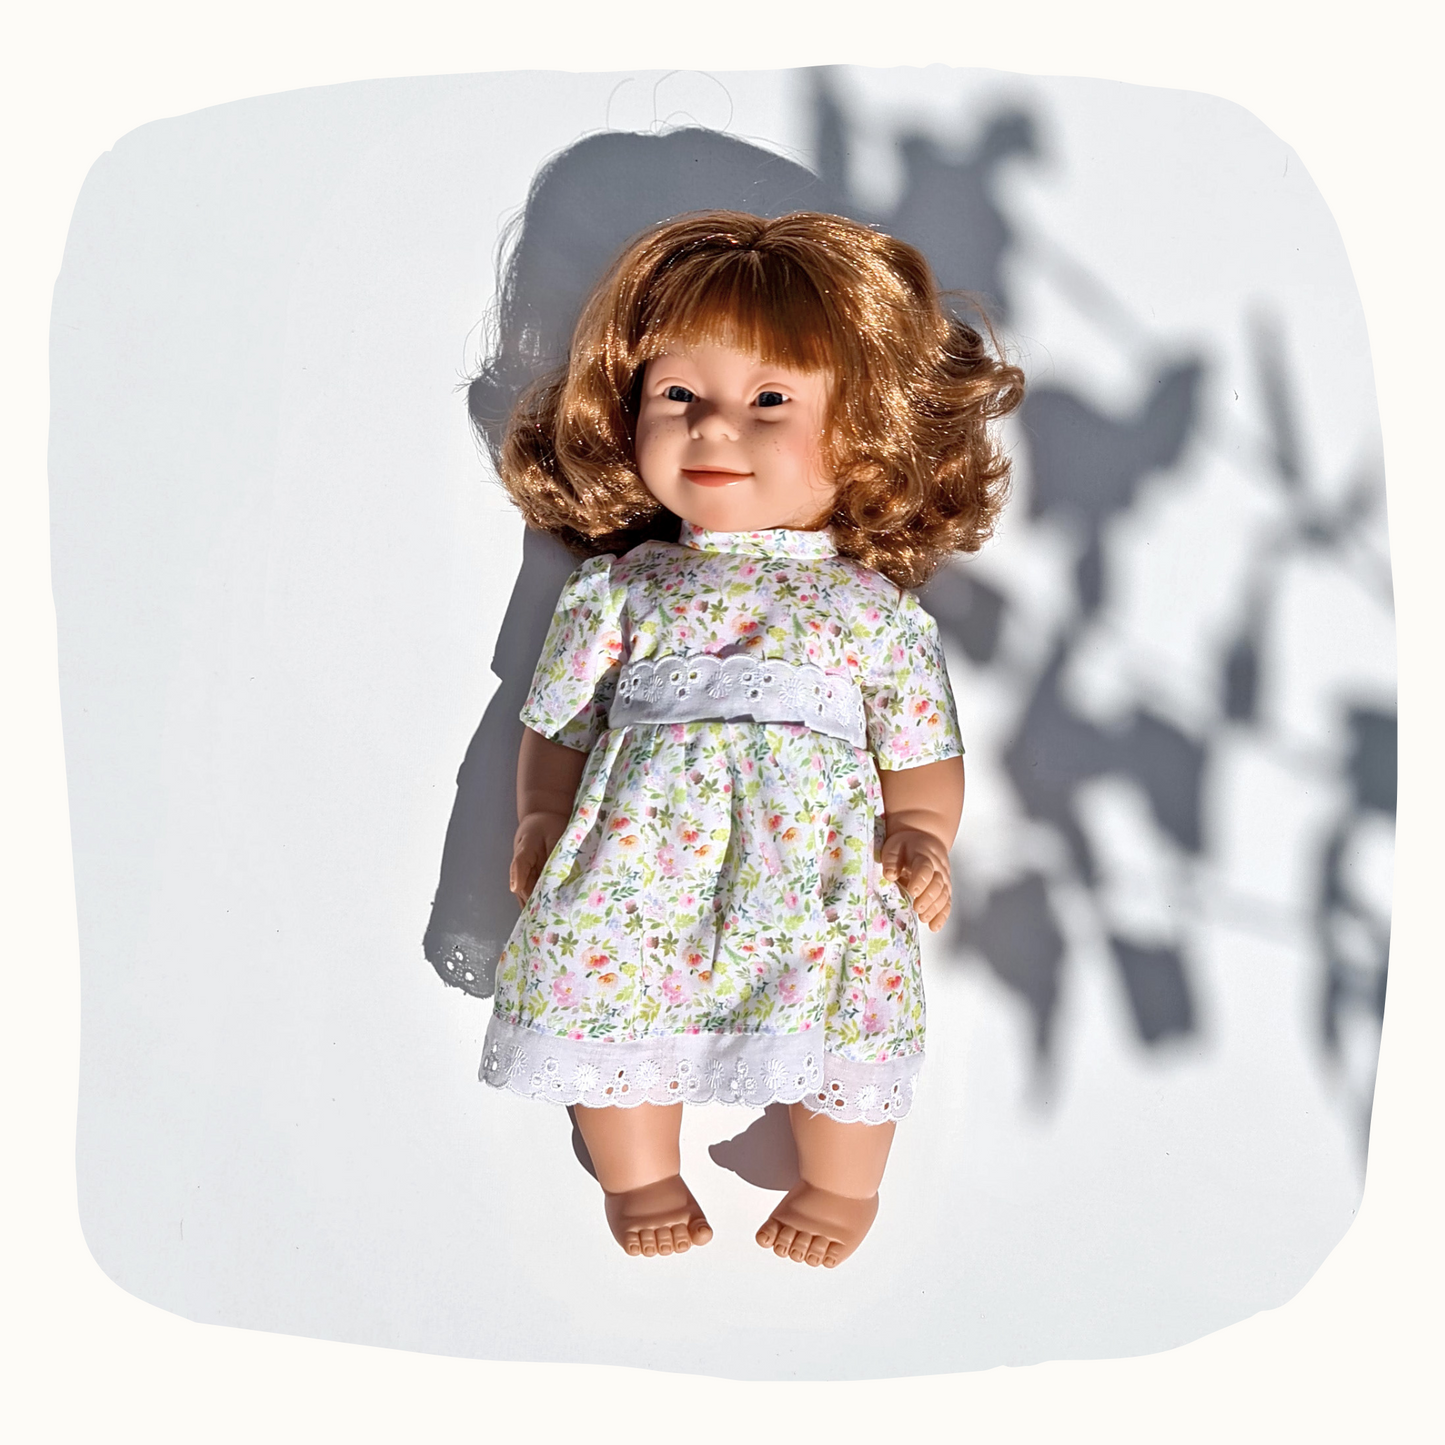 1/2 price! WYNTAH - BABY DOLL WITH DOWN SYNDROME - 40CM